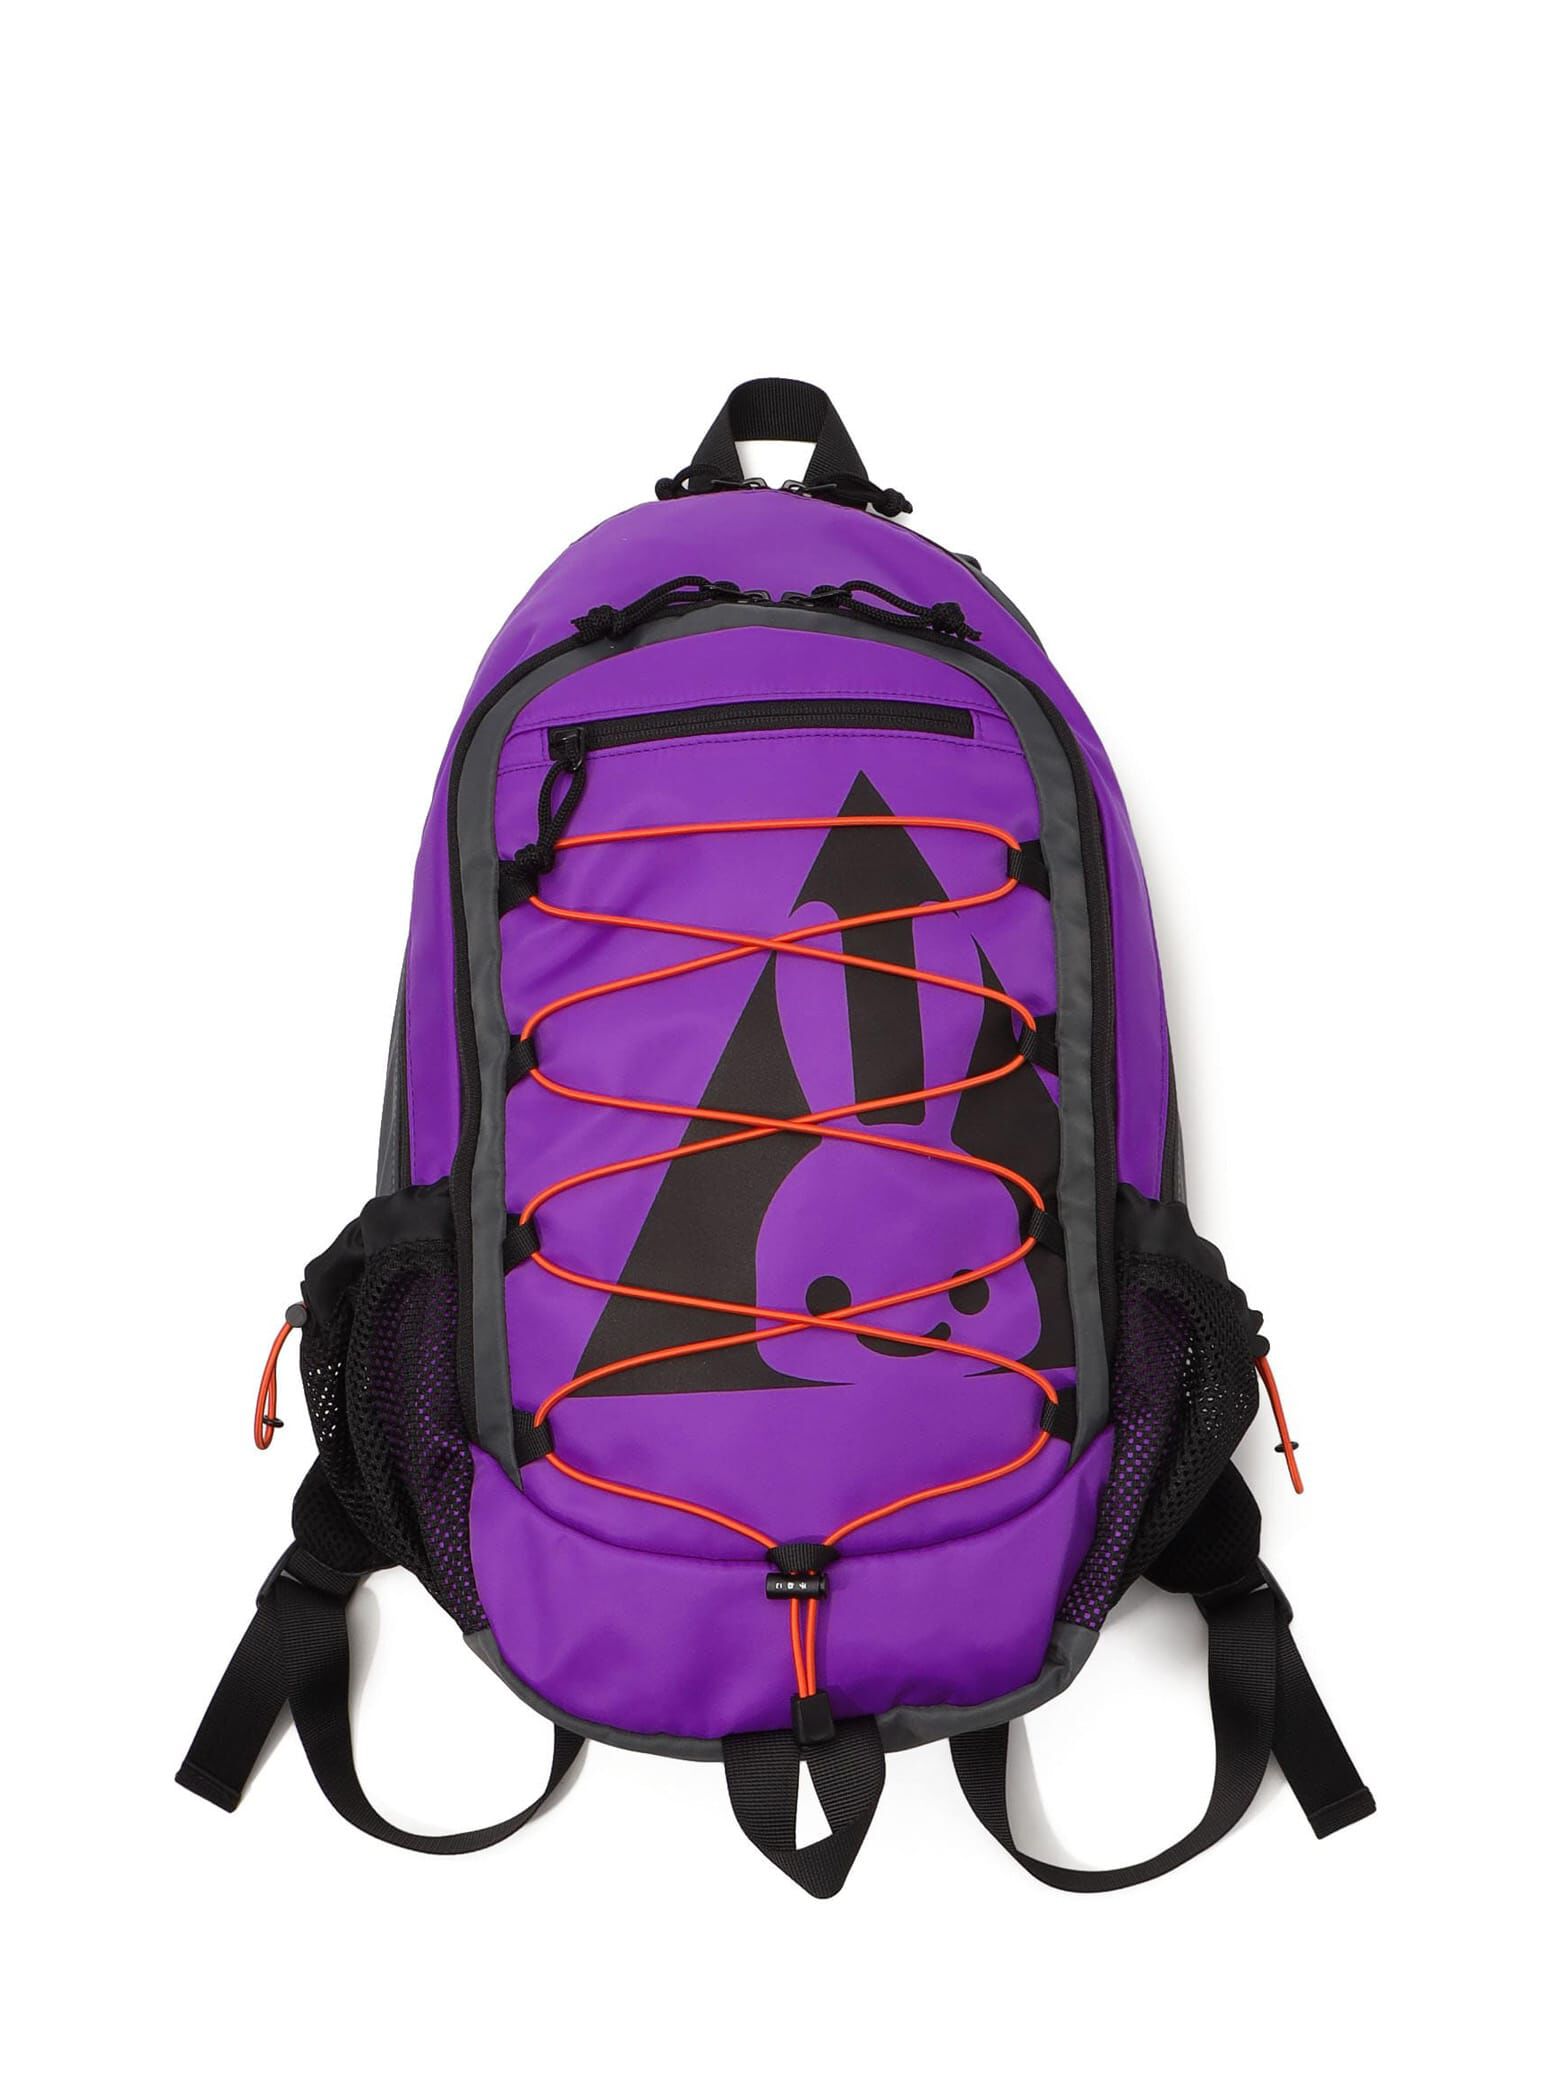 BACKPACKS | CUNE Official Global Online Store